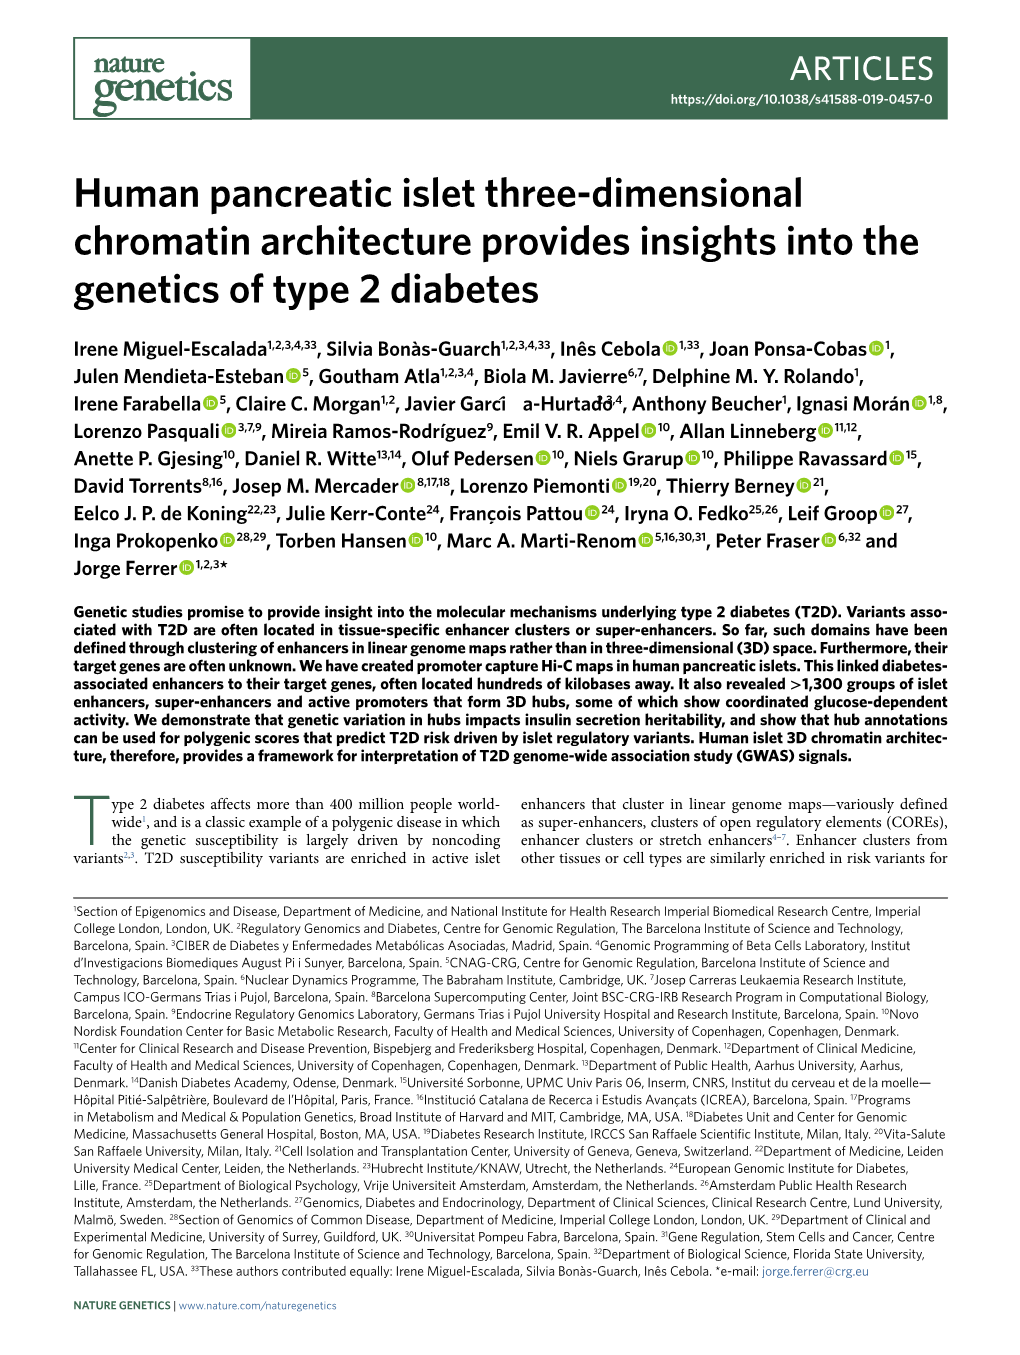 Human Pancreatic Islet Three-Dimensional Chromatin Architecture Provides Insights Into the Genetics of Type 2 Diabetes